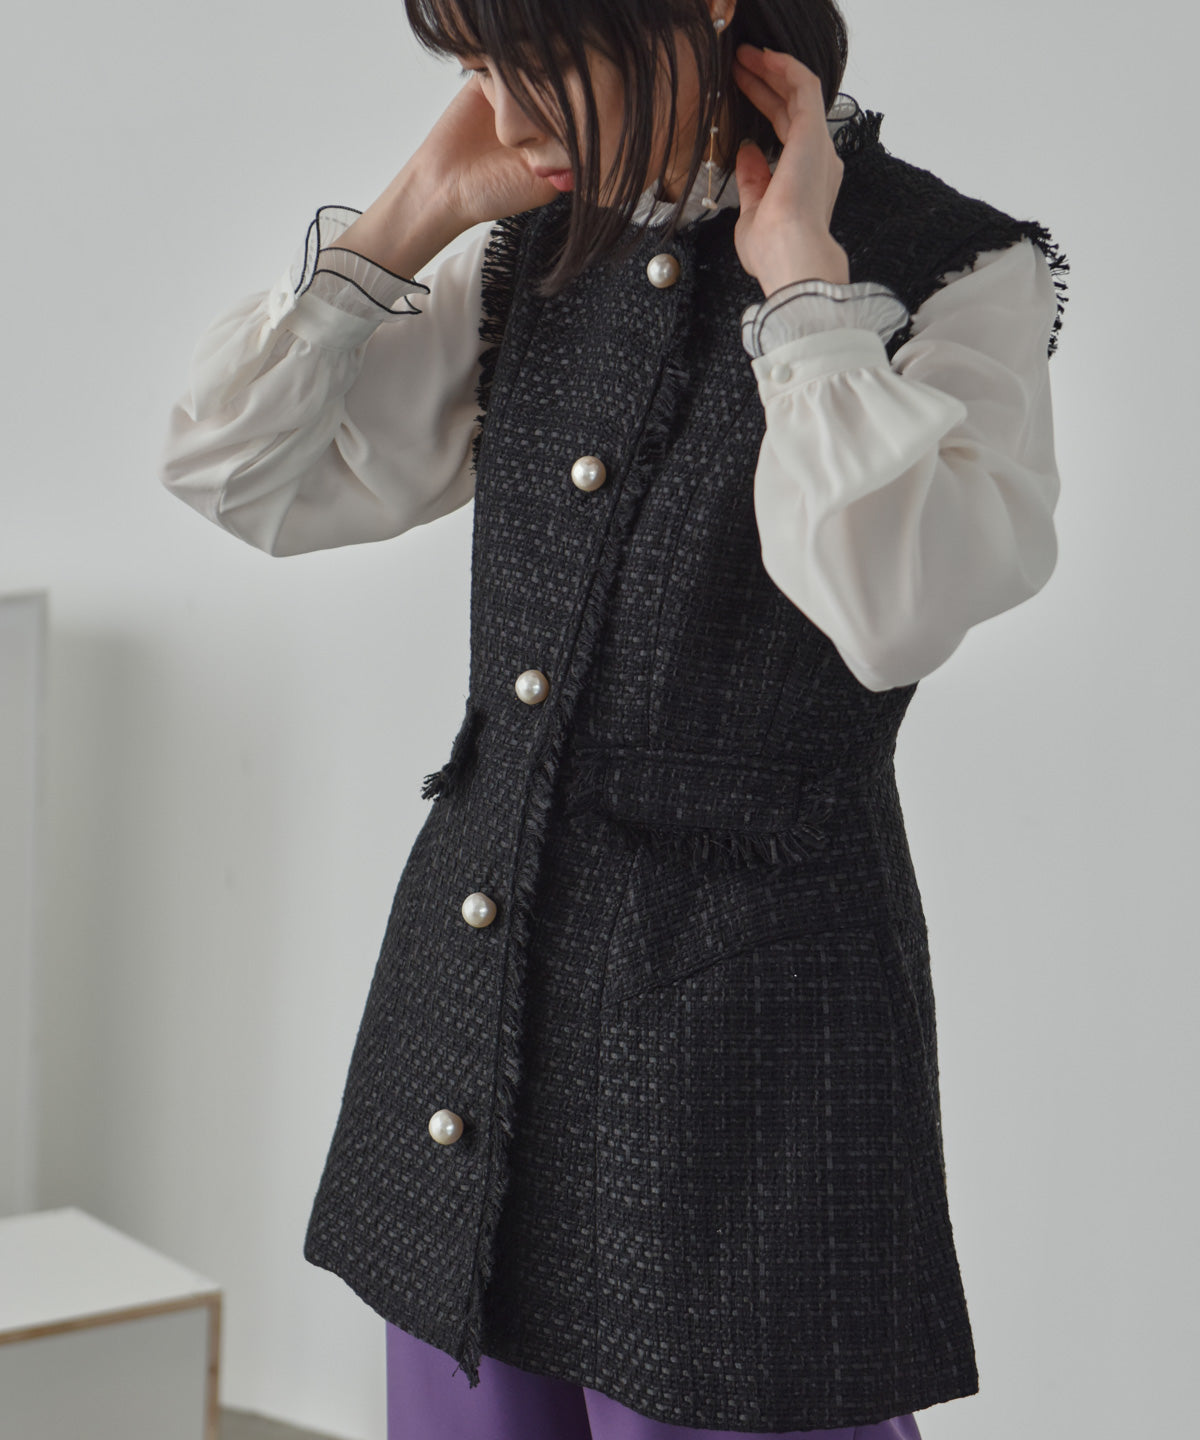 Pearl button tweed gilet